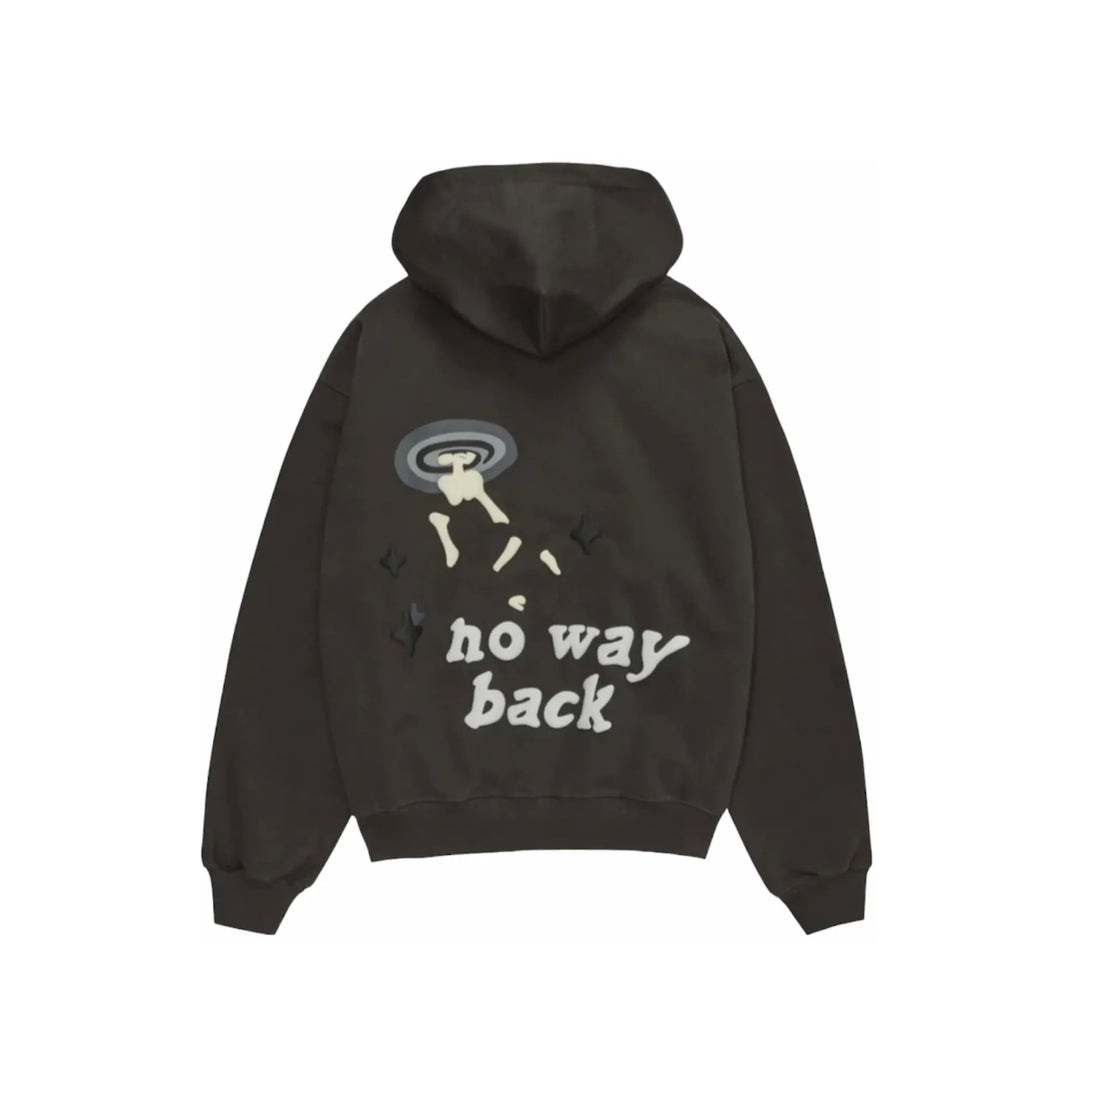 Broken Planet Market “Trapped In Time” Hoodie